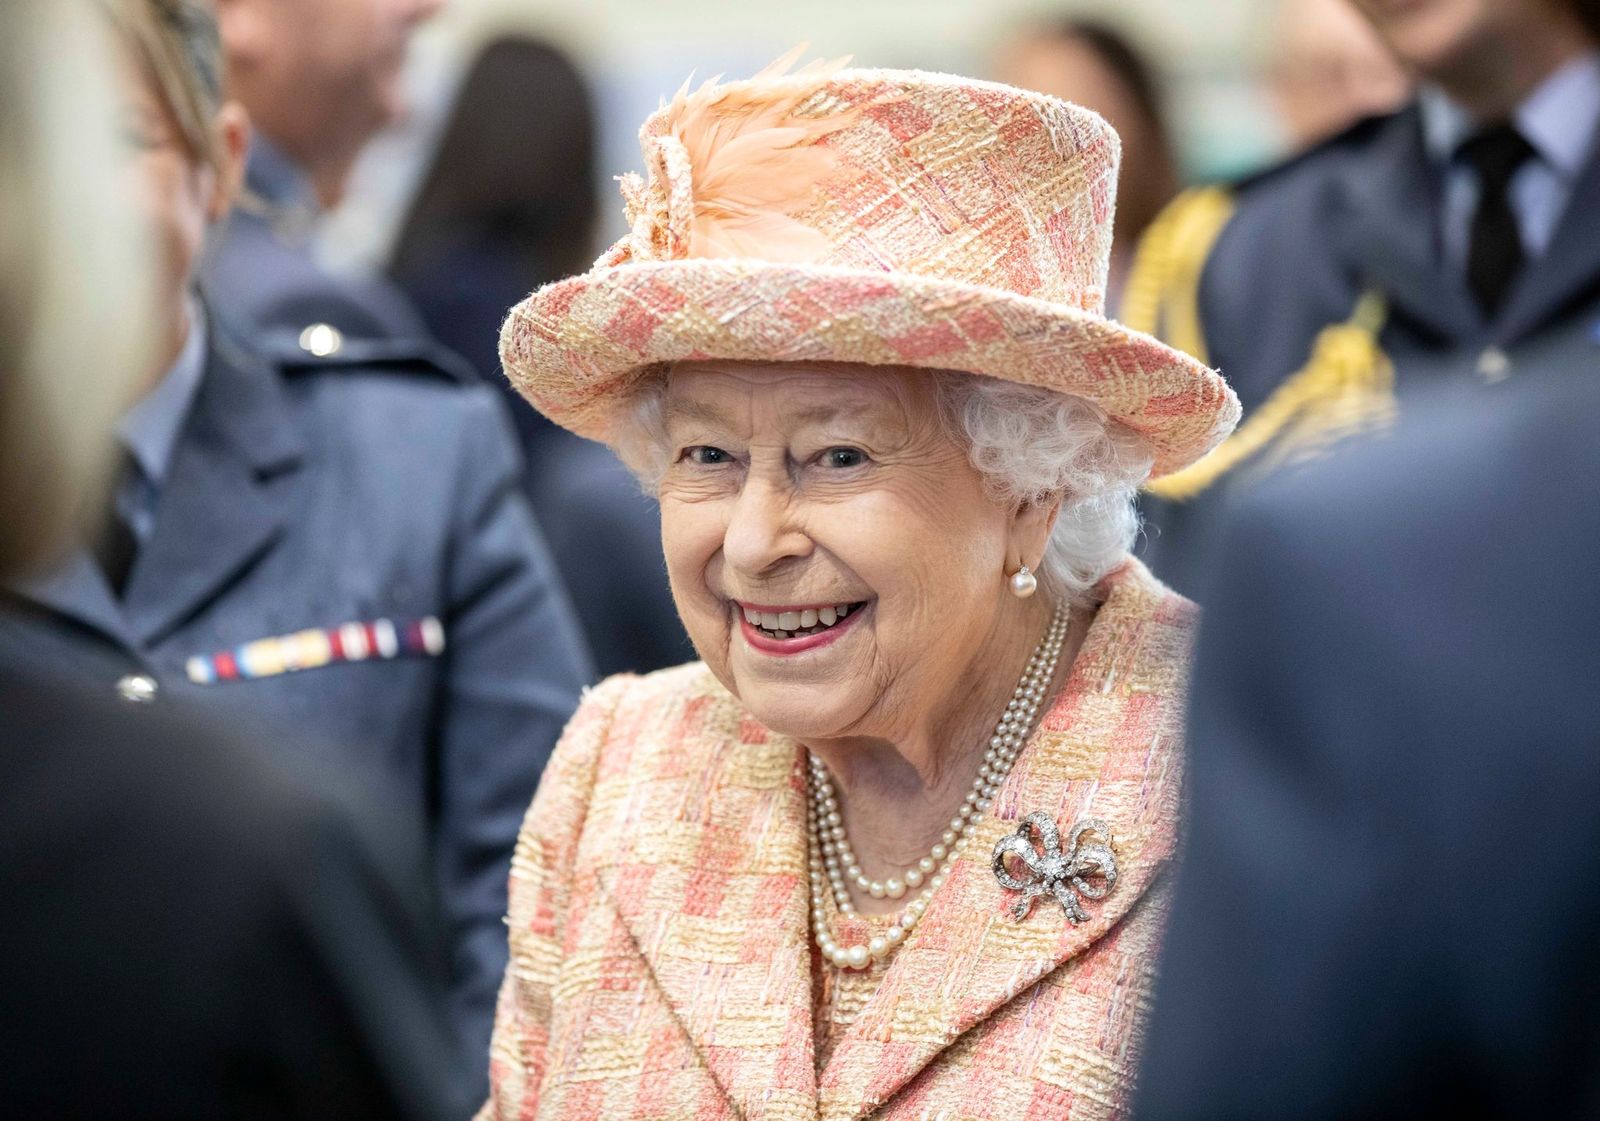 The Queen meets personnel at RAF Marham where she inspected the new integrated training center at Royal Air Force Marham on February 3, 2020, in King's Lynn, England | Photo: Richard Pohle - WPA Pool/Getty Images